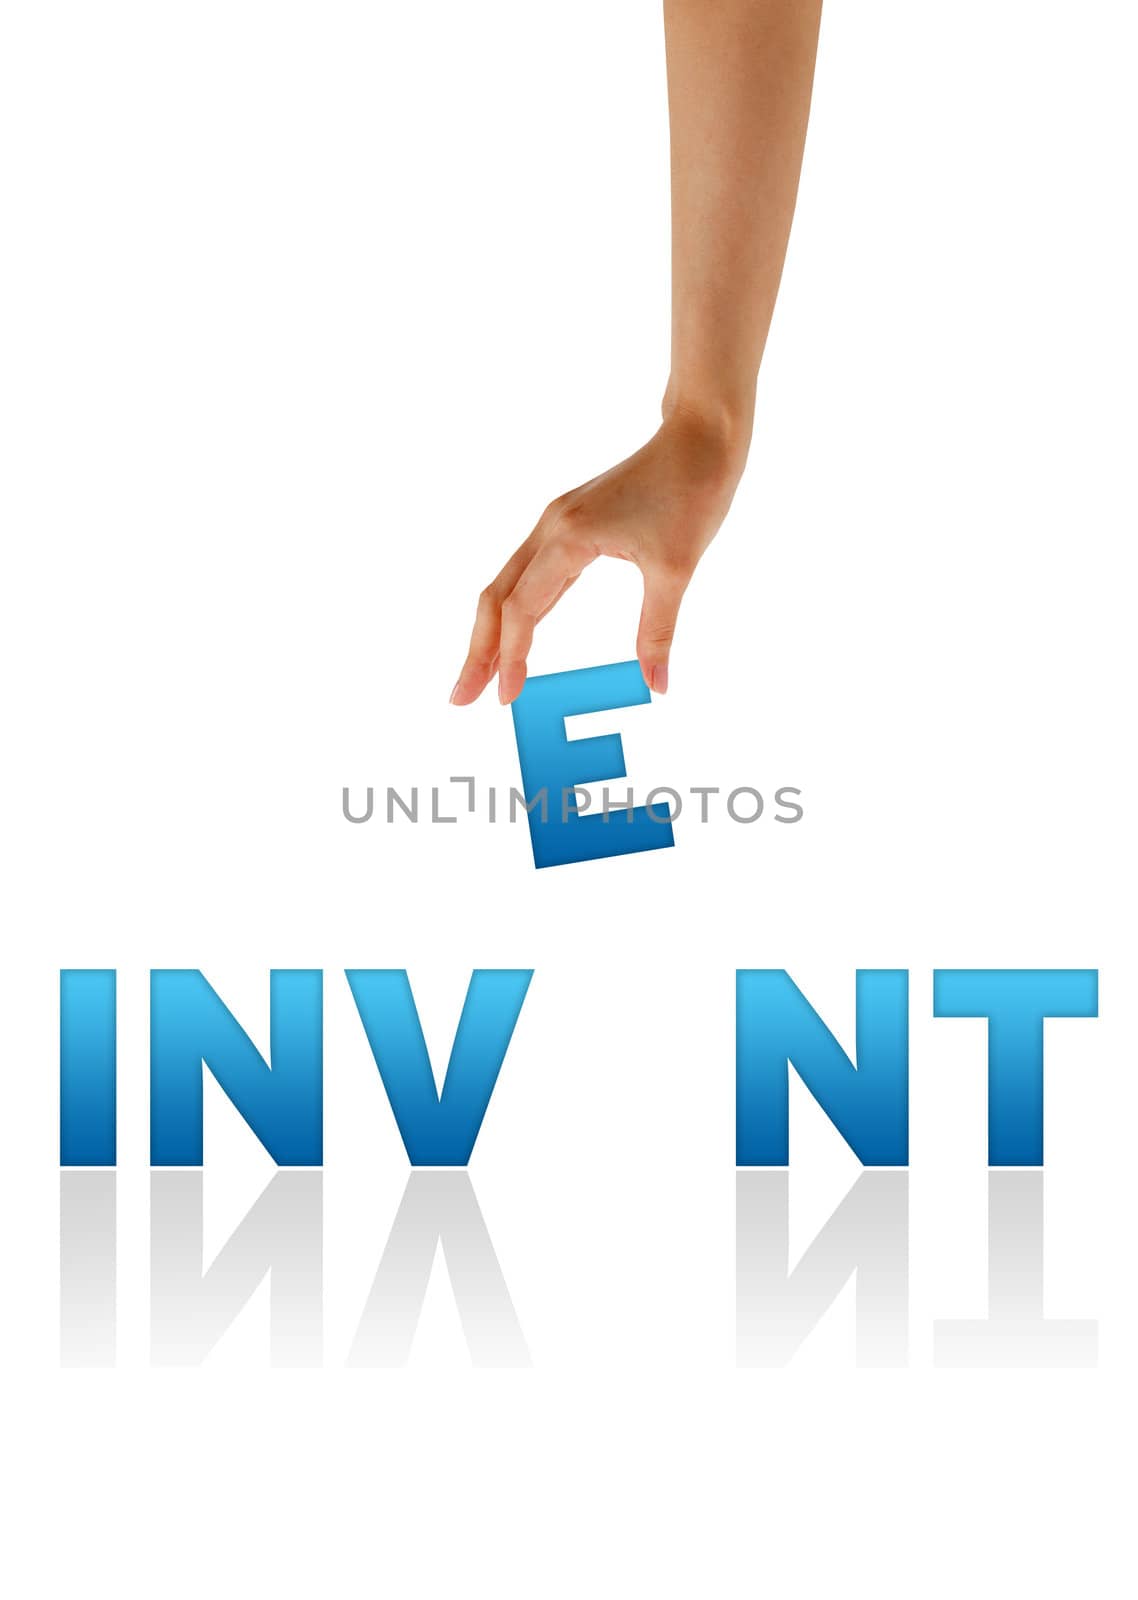 High resolution graphic of a hand holding the letter E from the word Invent